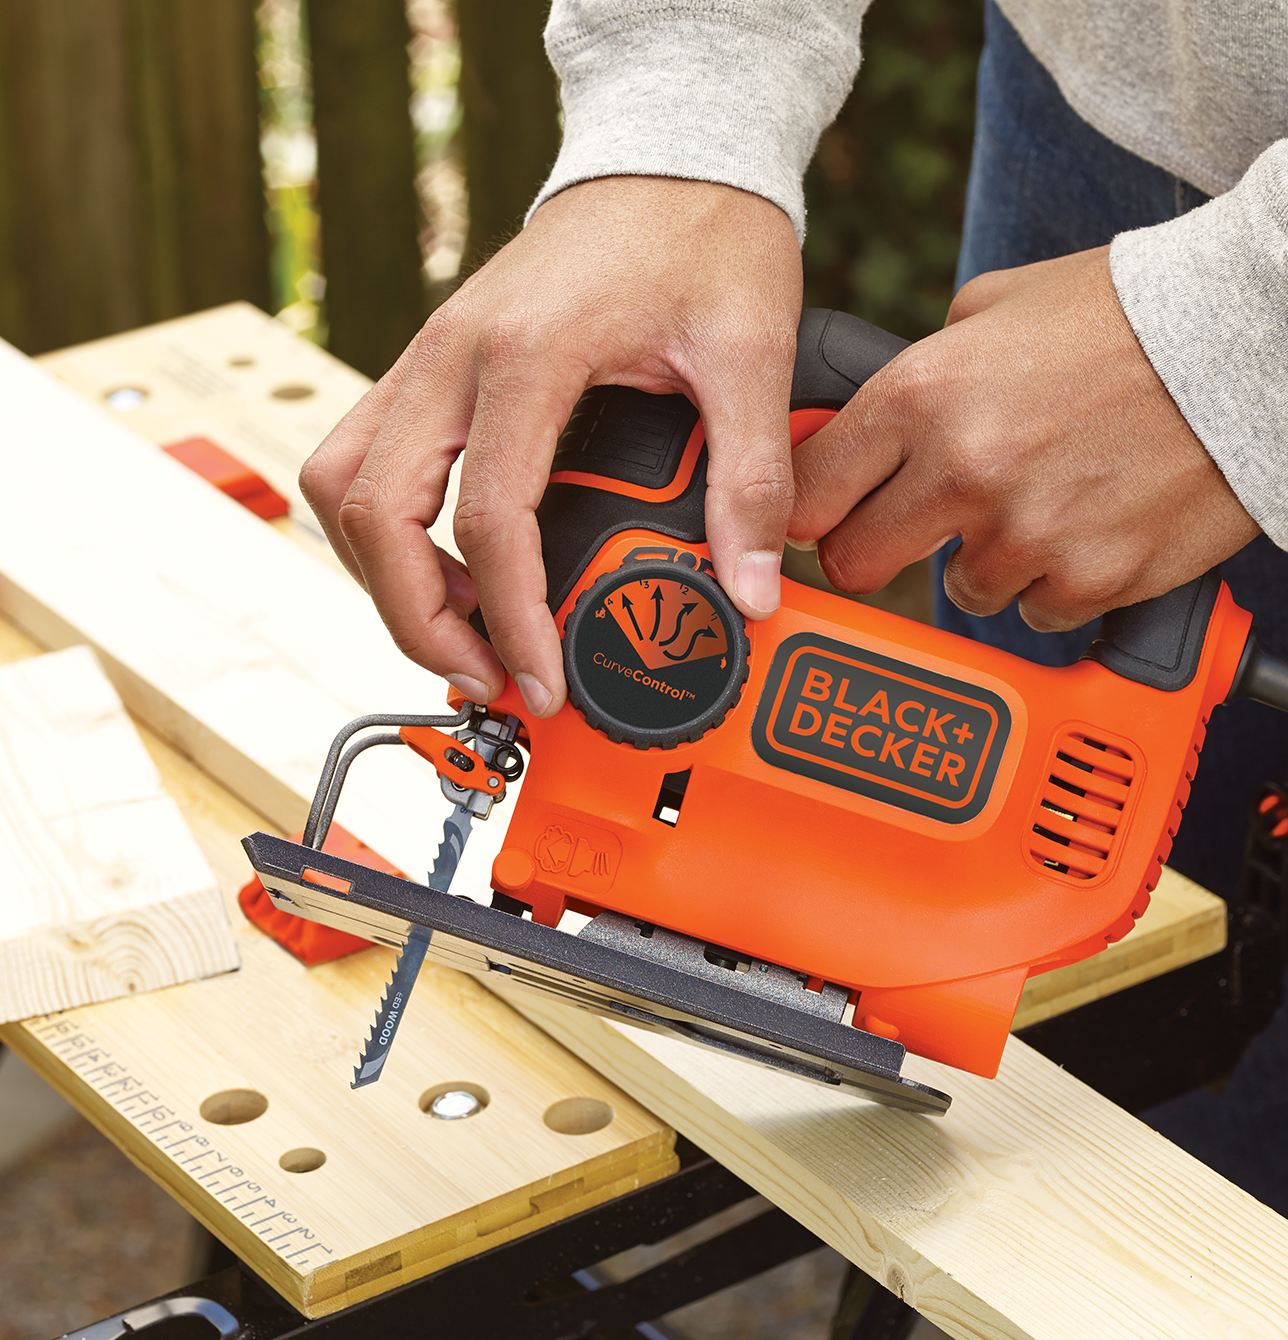 Black+Decker Philippines - Cordless Jigsaw? You can get it with the GOPAK!  Glide through without the hassle of dangling wires. Buy yours here!   #BlackandDecker #BlackandDeckerPH